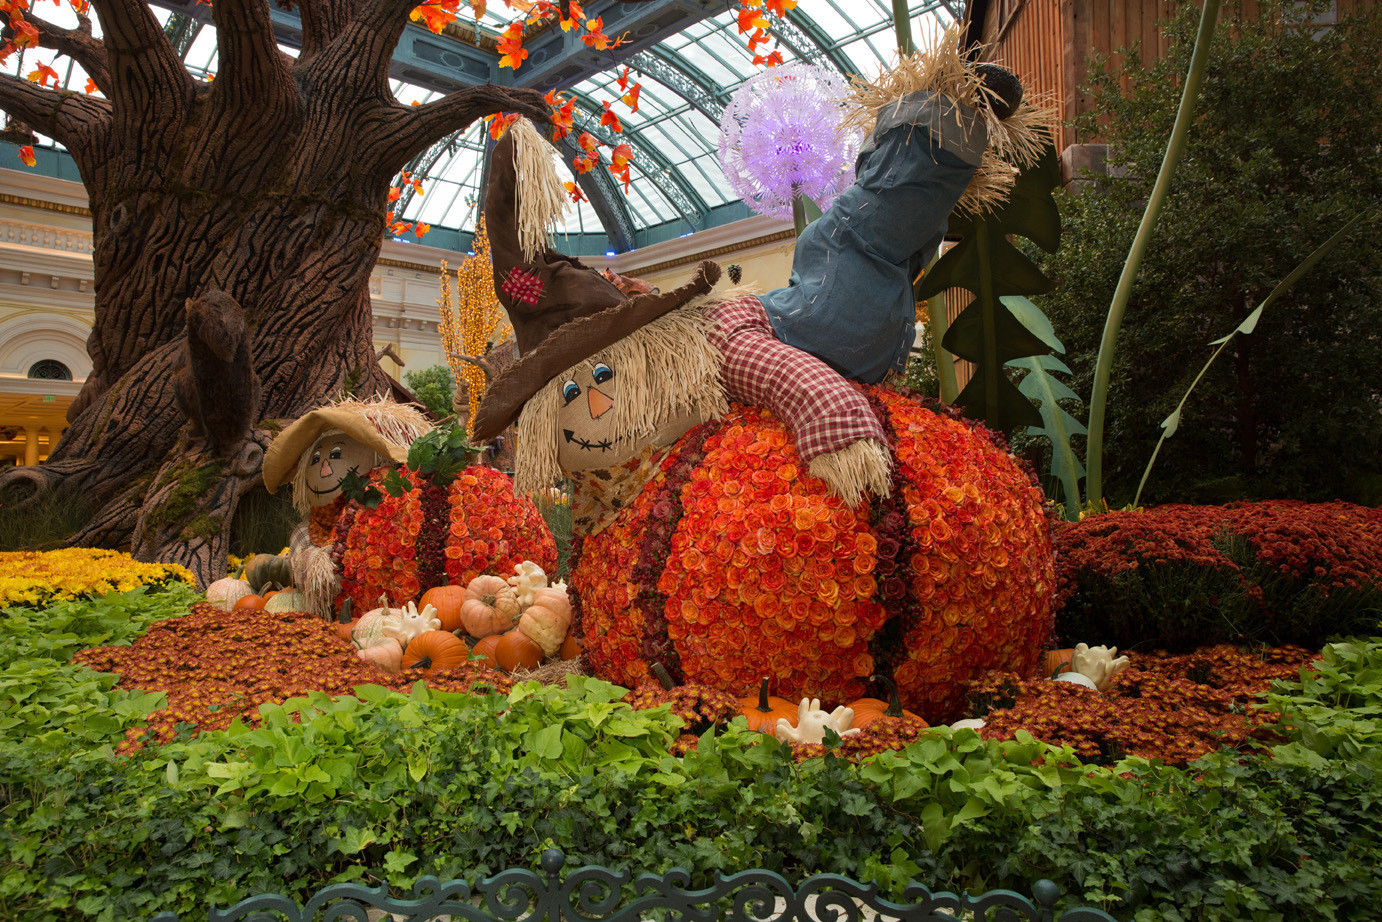 Scarecrows and a talking tree highlight Bellagio's autumn display - LA